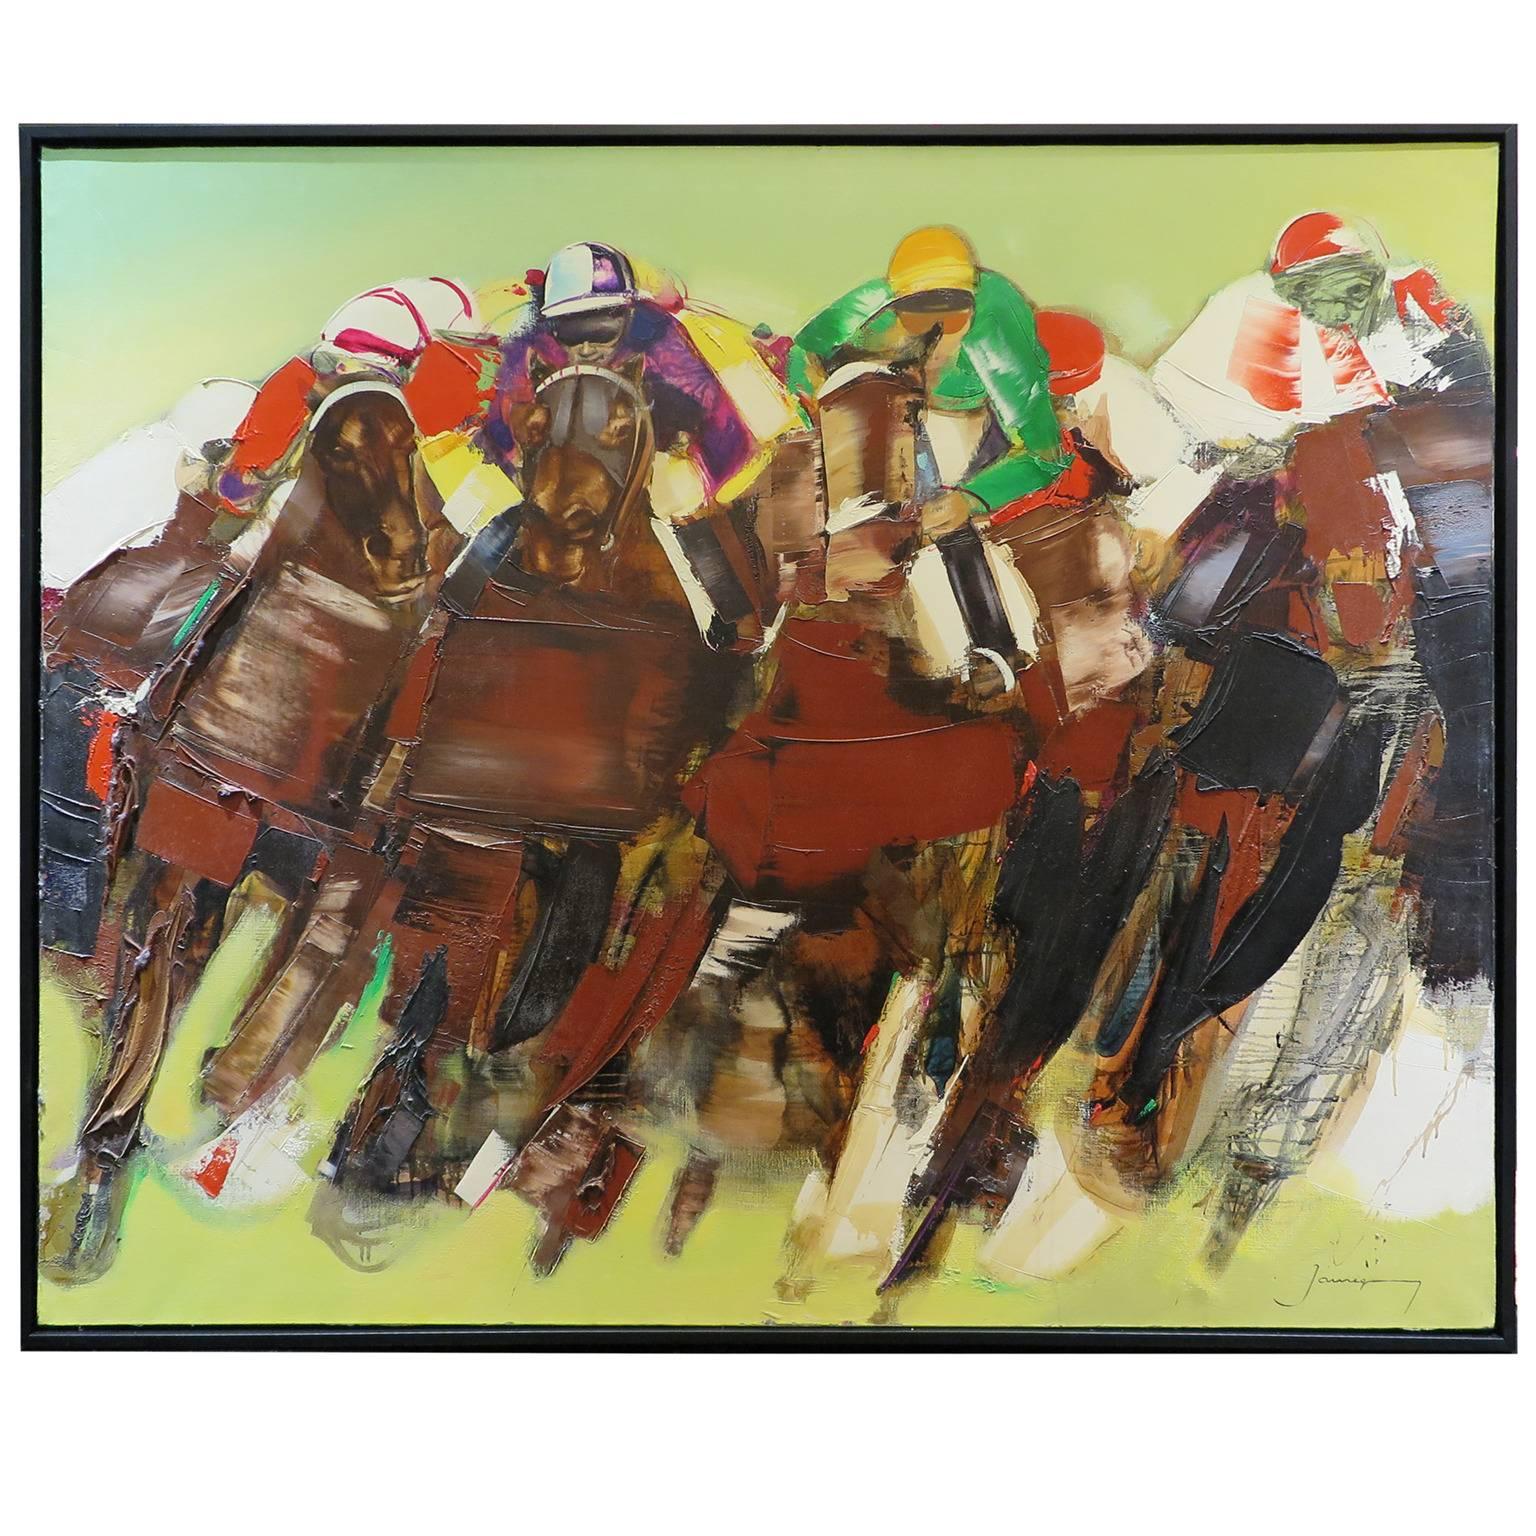 Oil on Canvas Painting Titled "Derby" by Christian Jaureguy